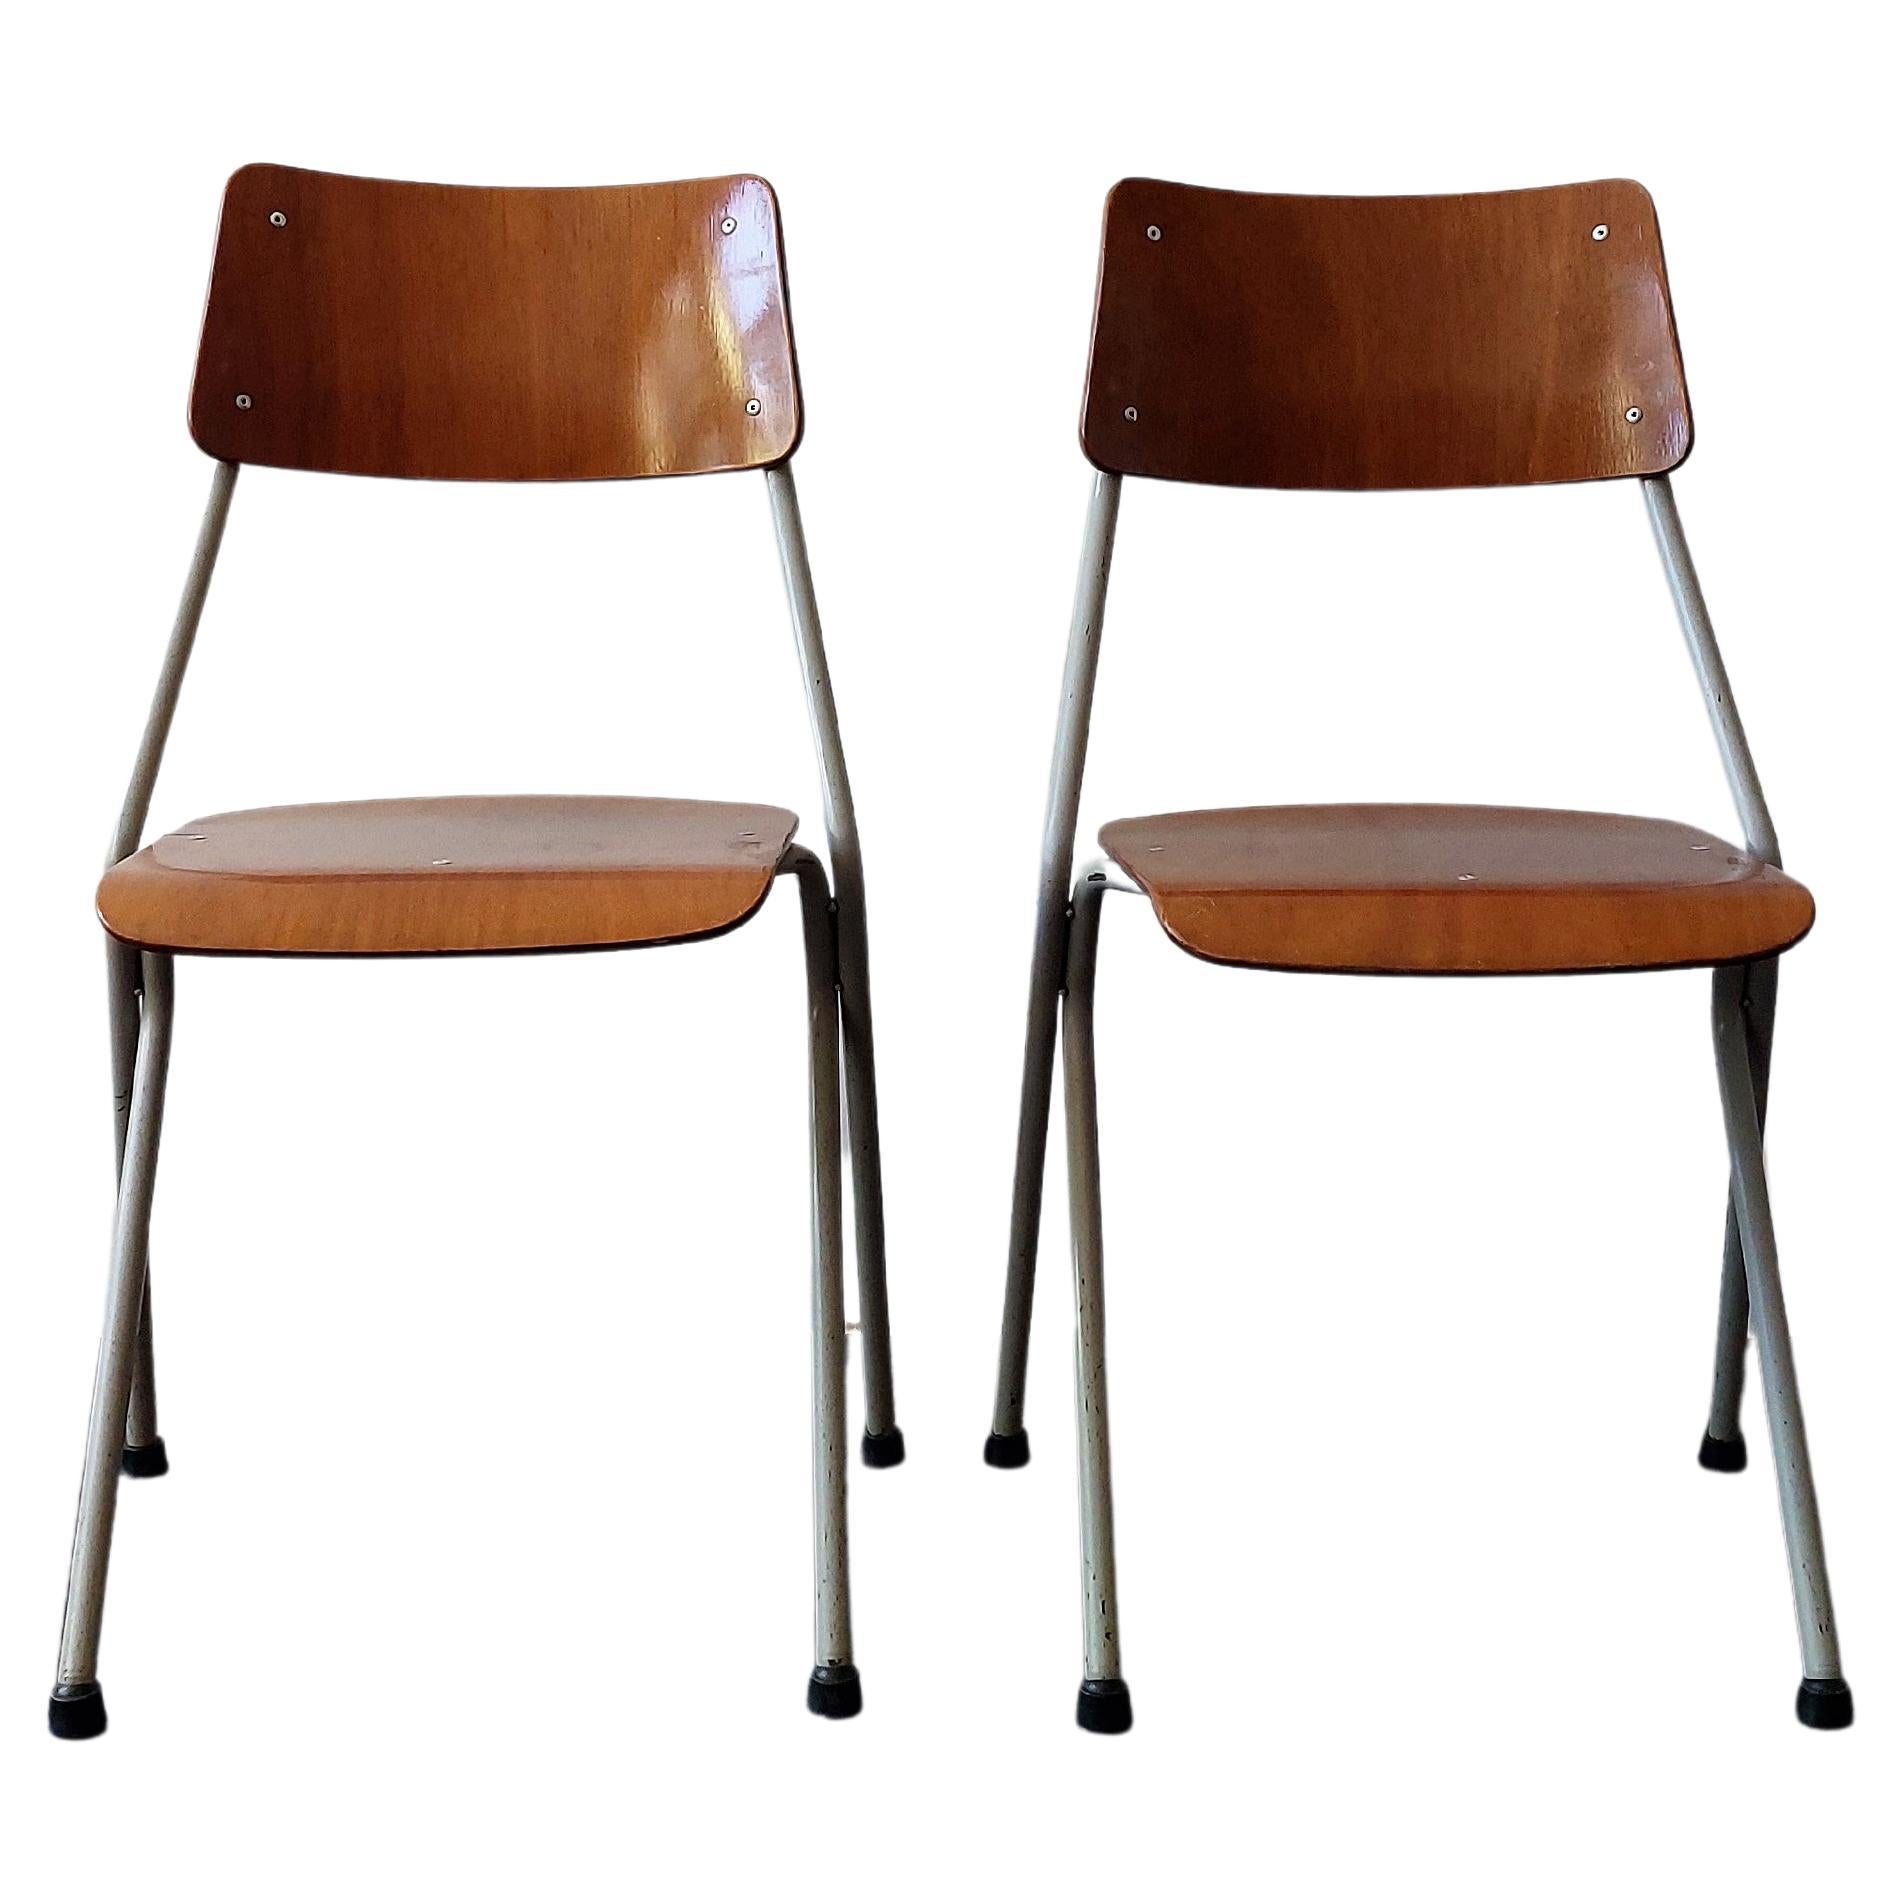 Set of 2 chairs by Ahrend RIB, The Netherlands 1964 For Sale